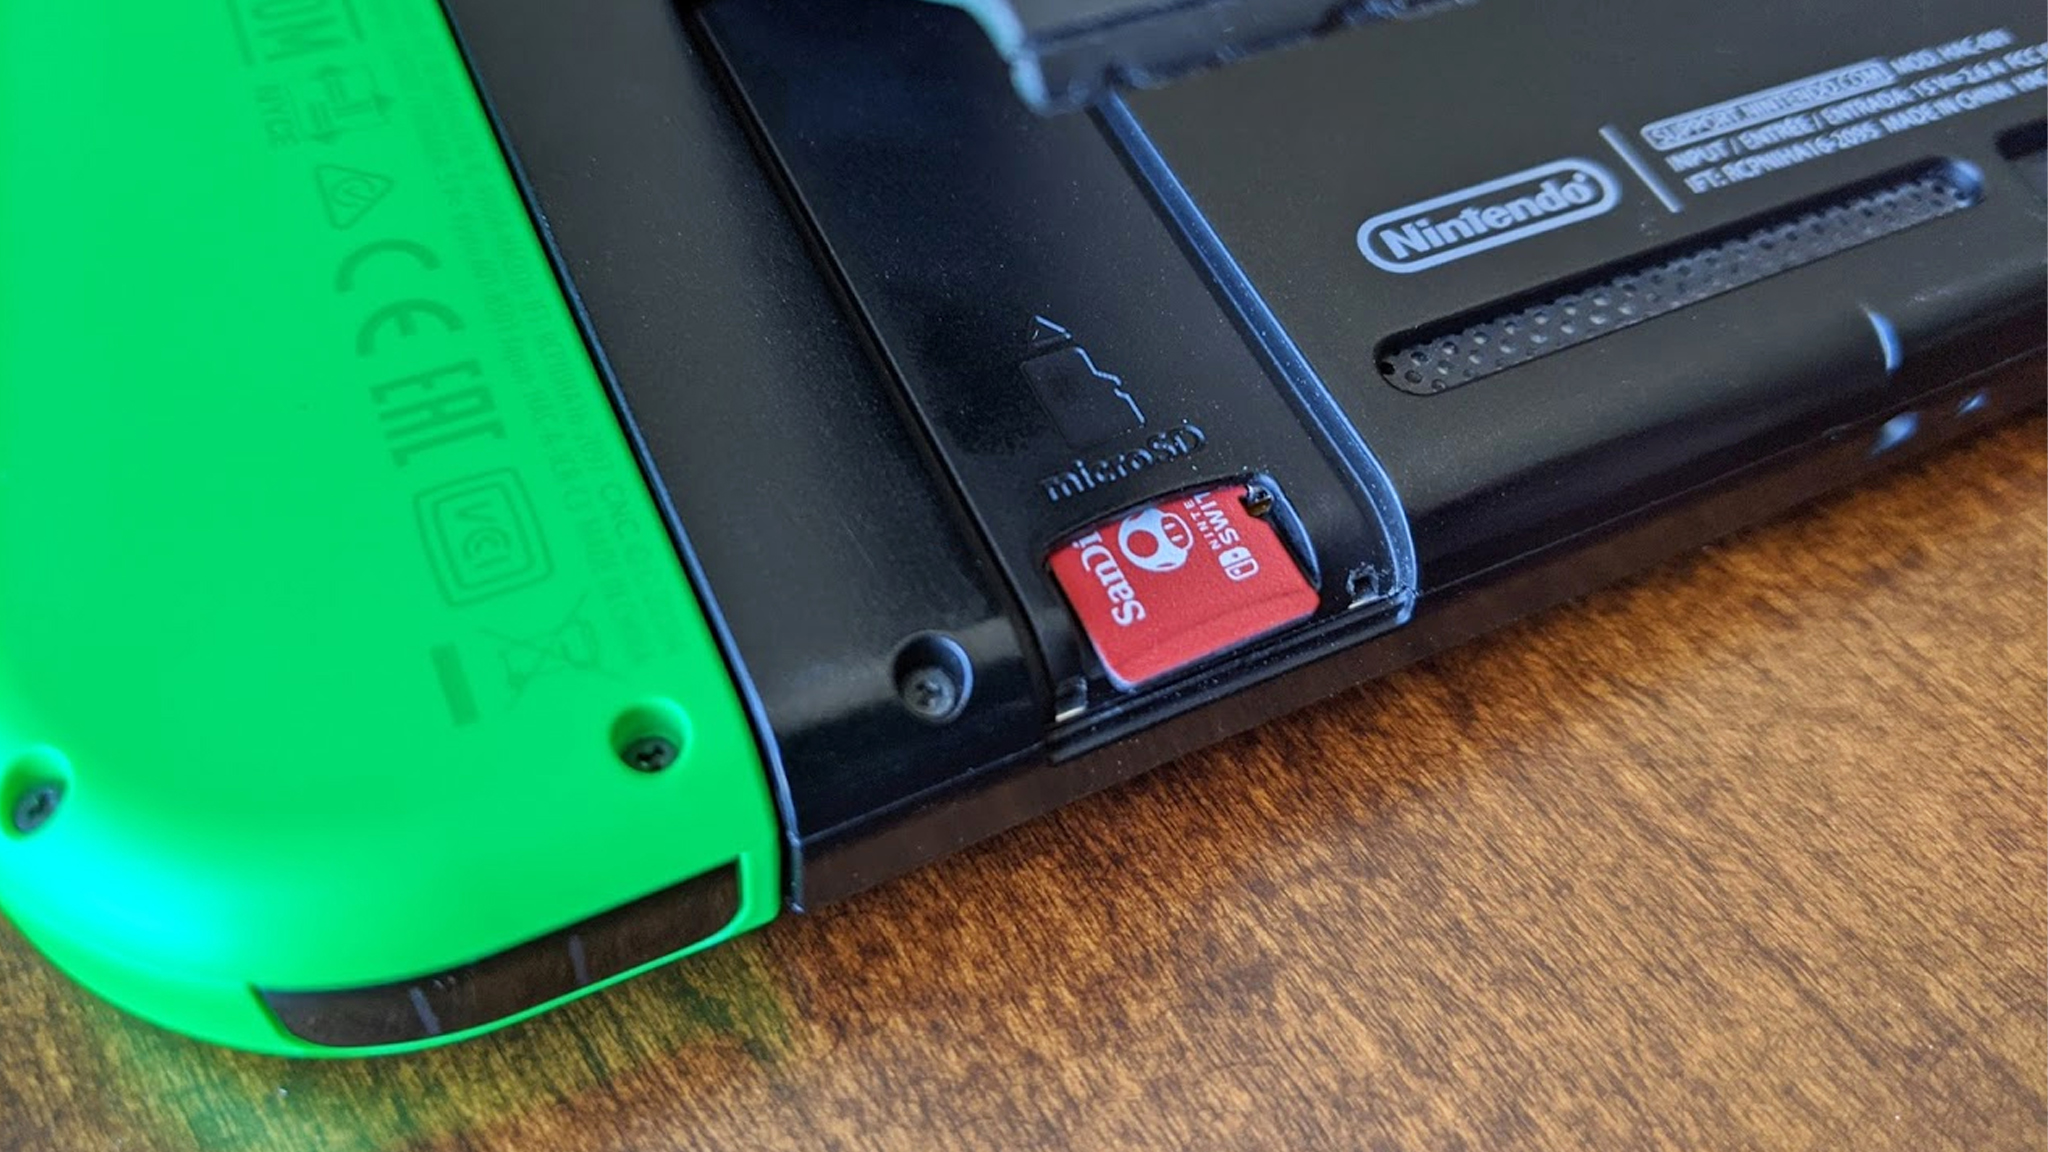 Which size card is best for Nintendo Switch?